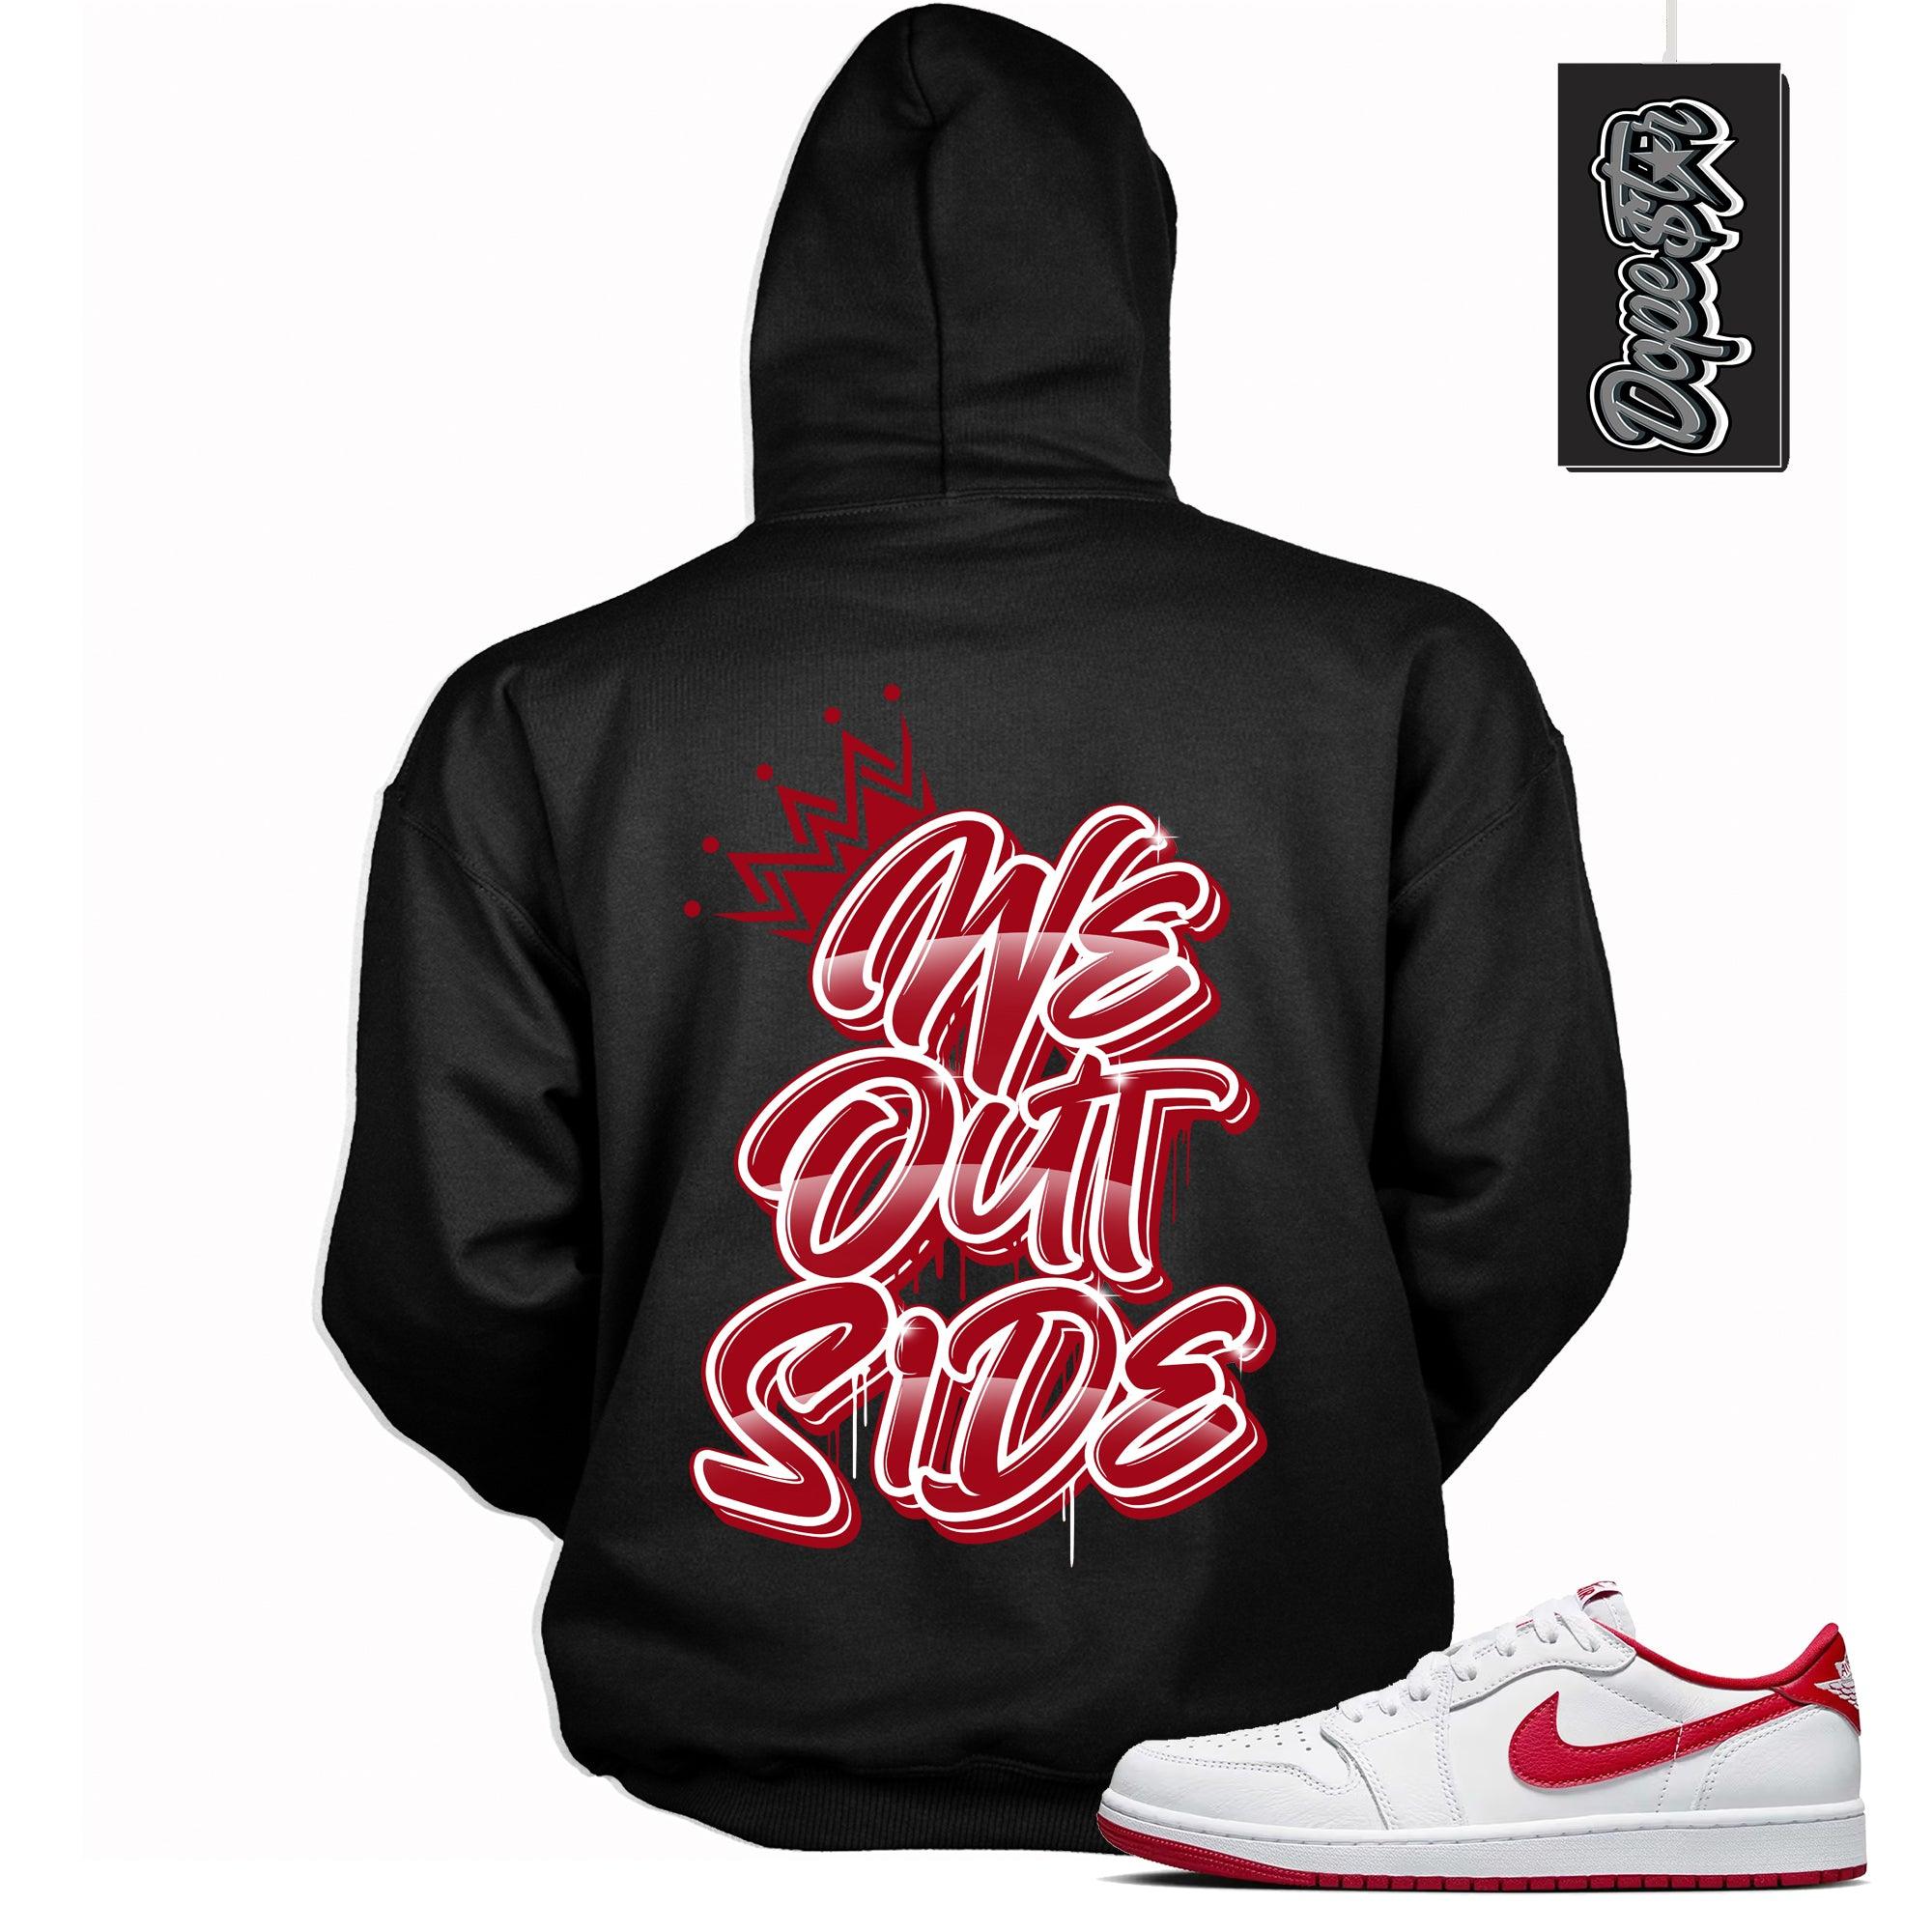 Cool Black Graphic Hoodie with “ WE OUTSIDE “ print, that perfectly matches Air Jordan 1 Retro Low OG University Red and white sneakers